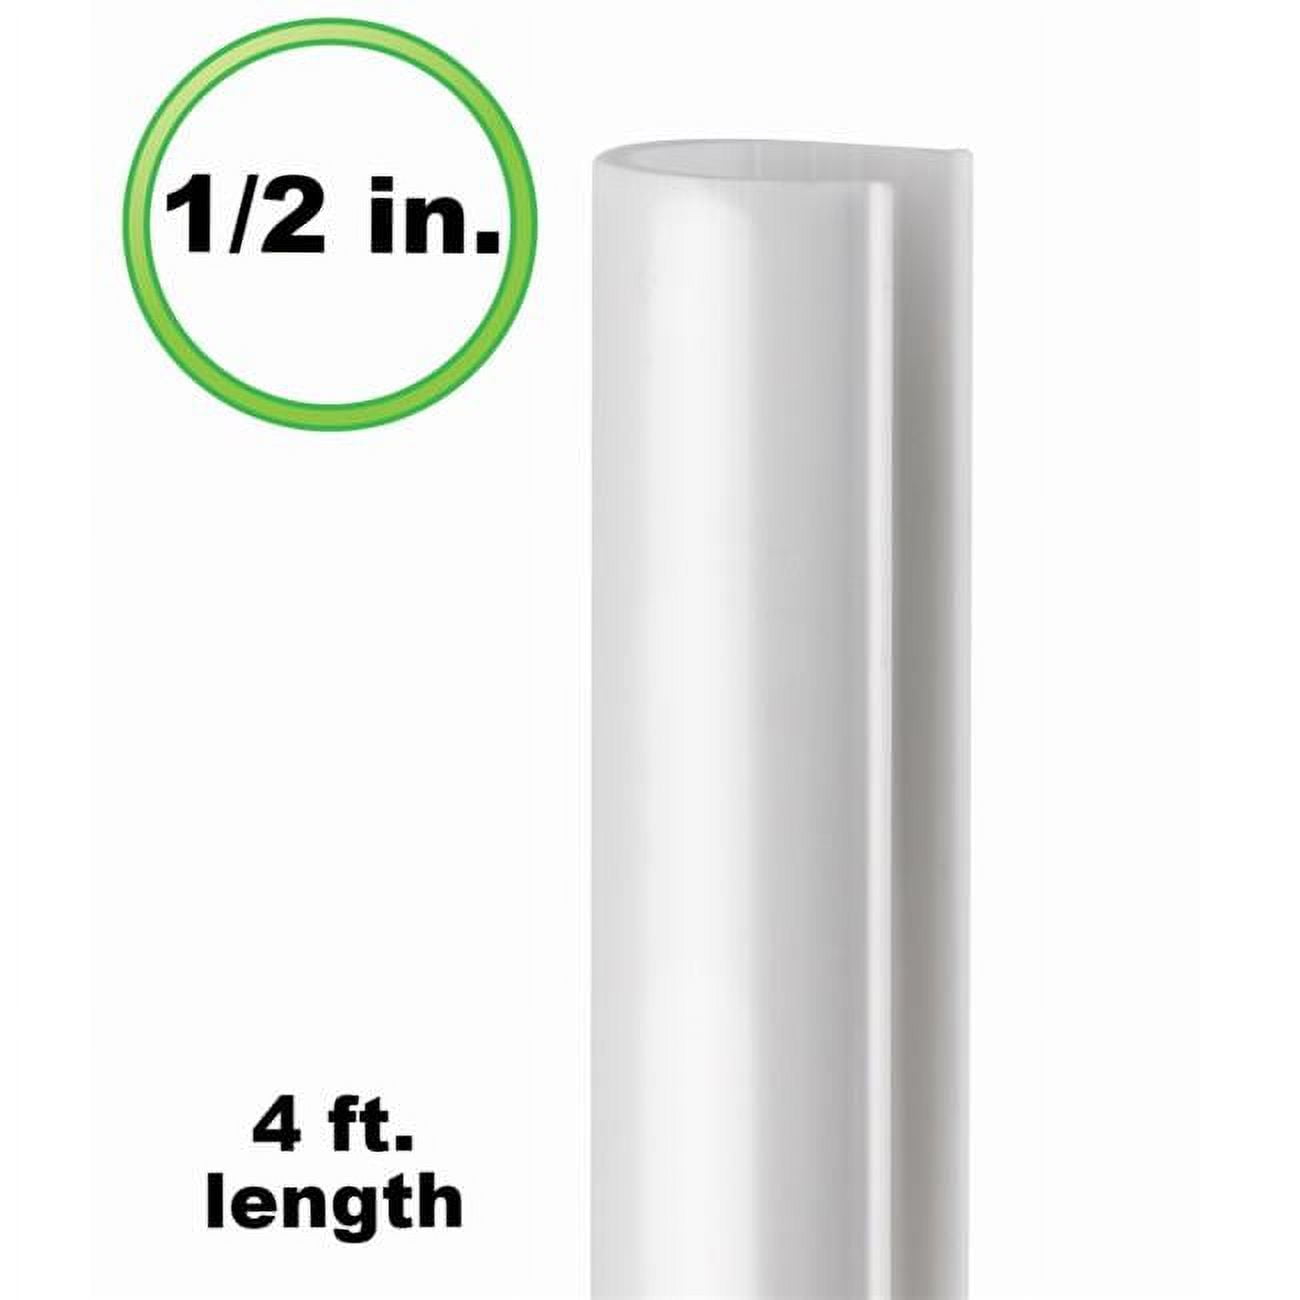 01 4 Ft. X 0.5 In. Snap Clamp Abs For 0.5 In. Pvc Pipe